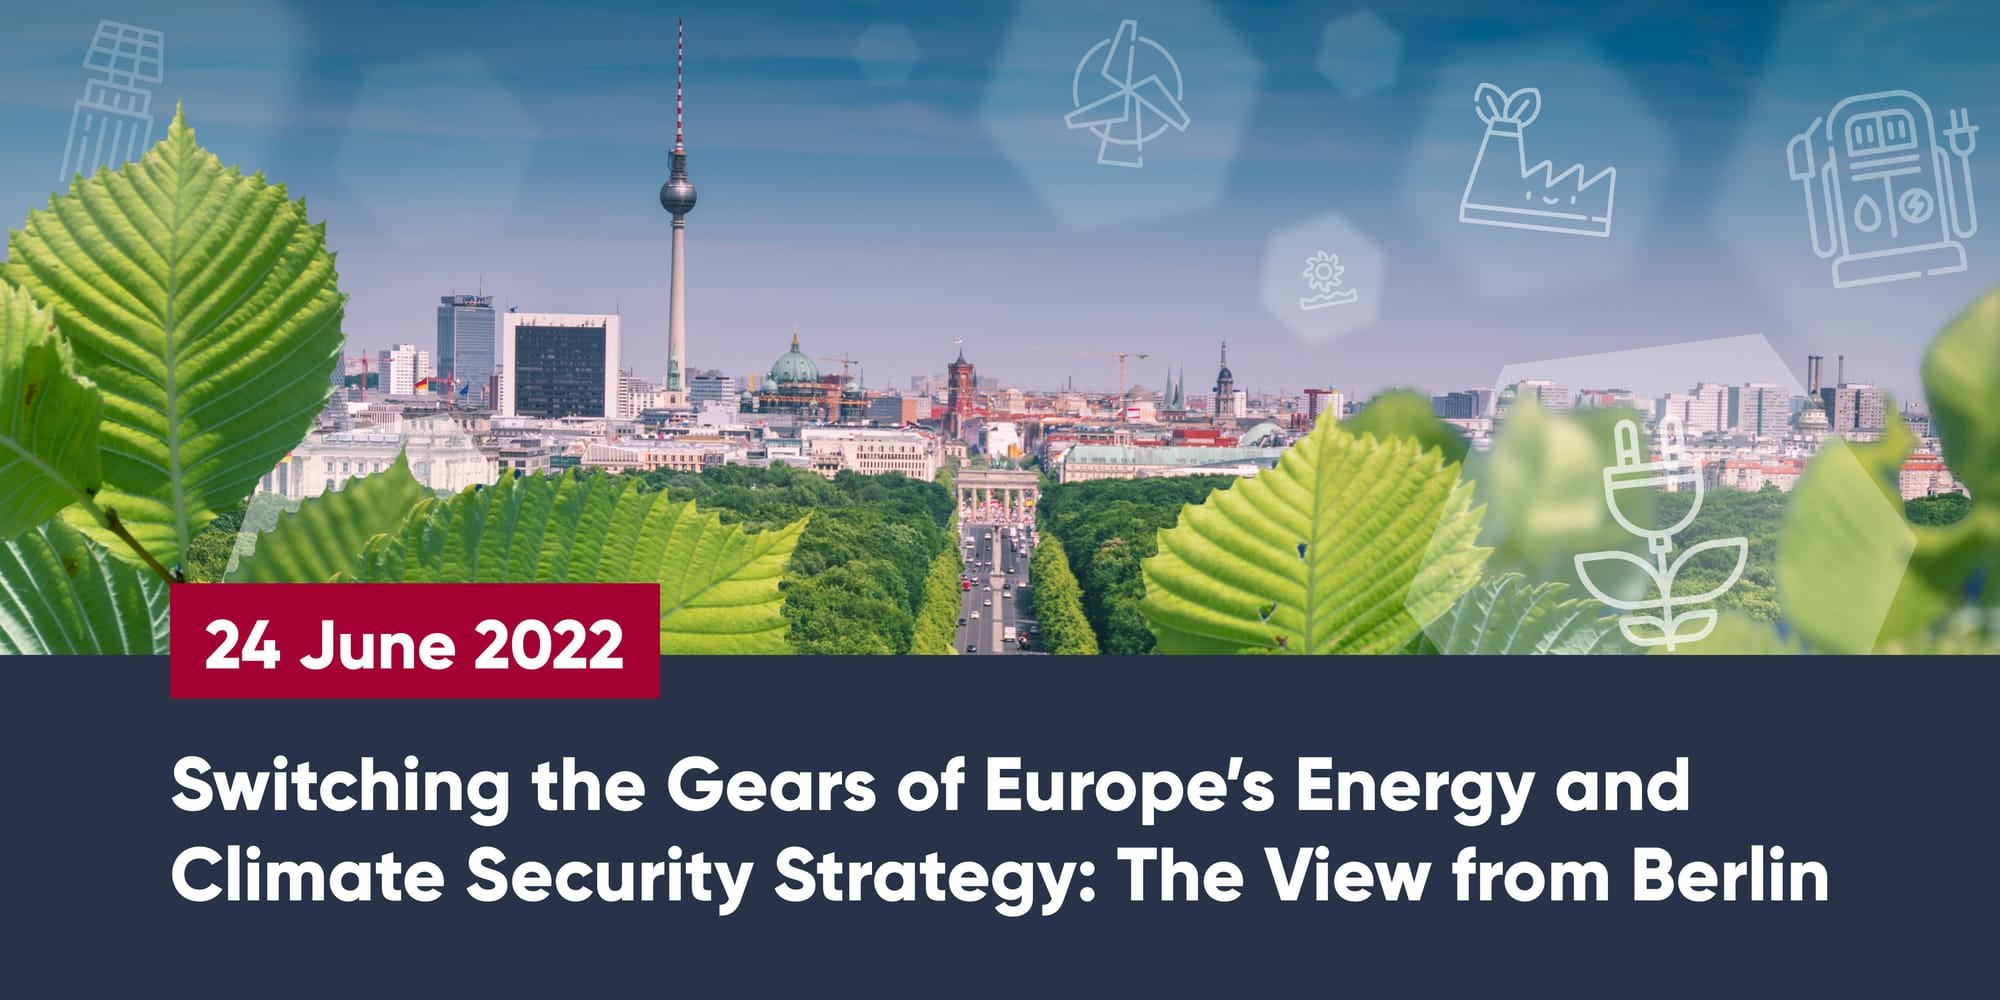 Switching the Gears of Europe’s Energy and Climate Security Strategy: The View from Berlin